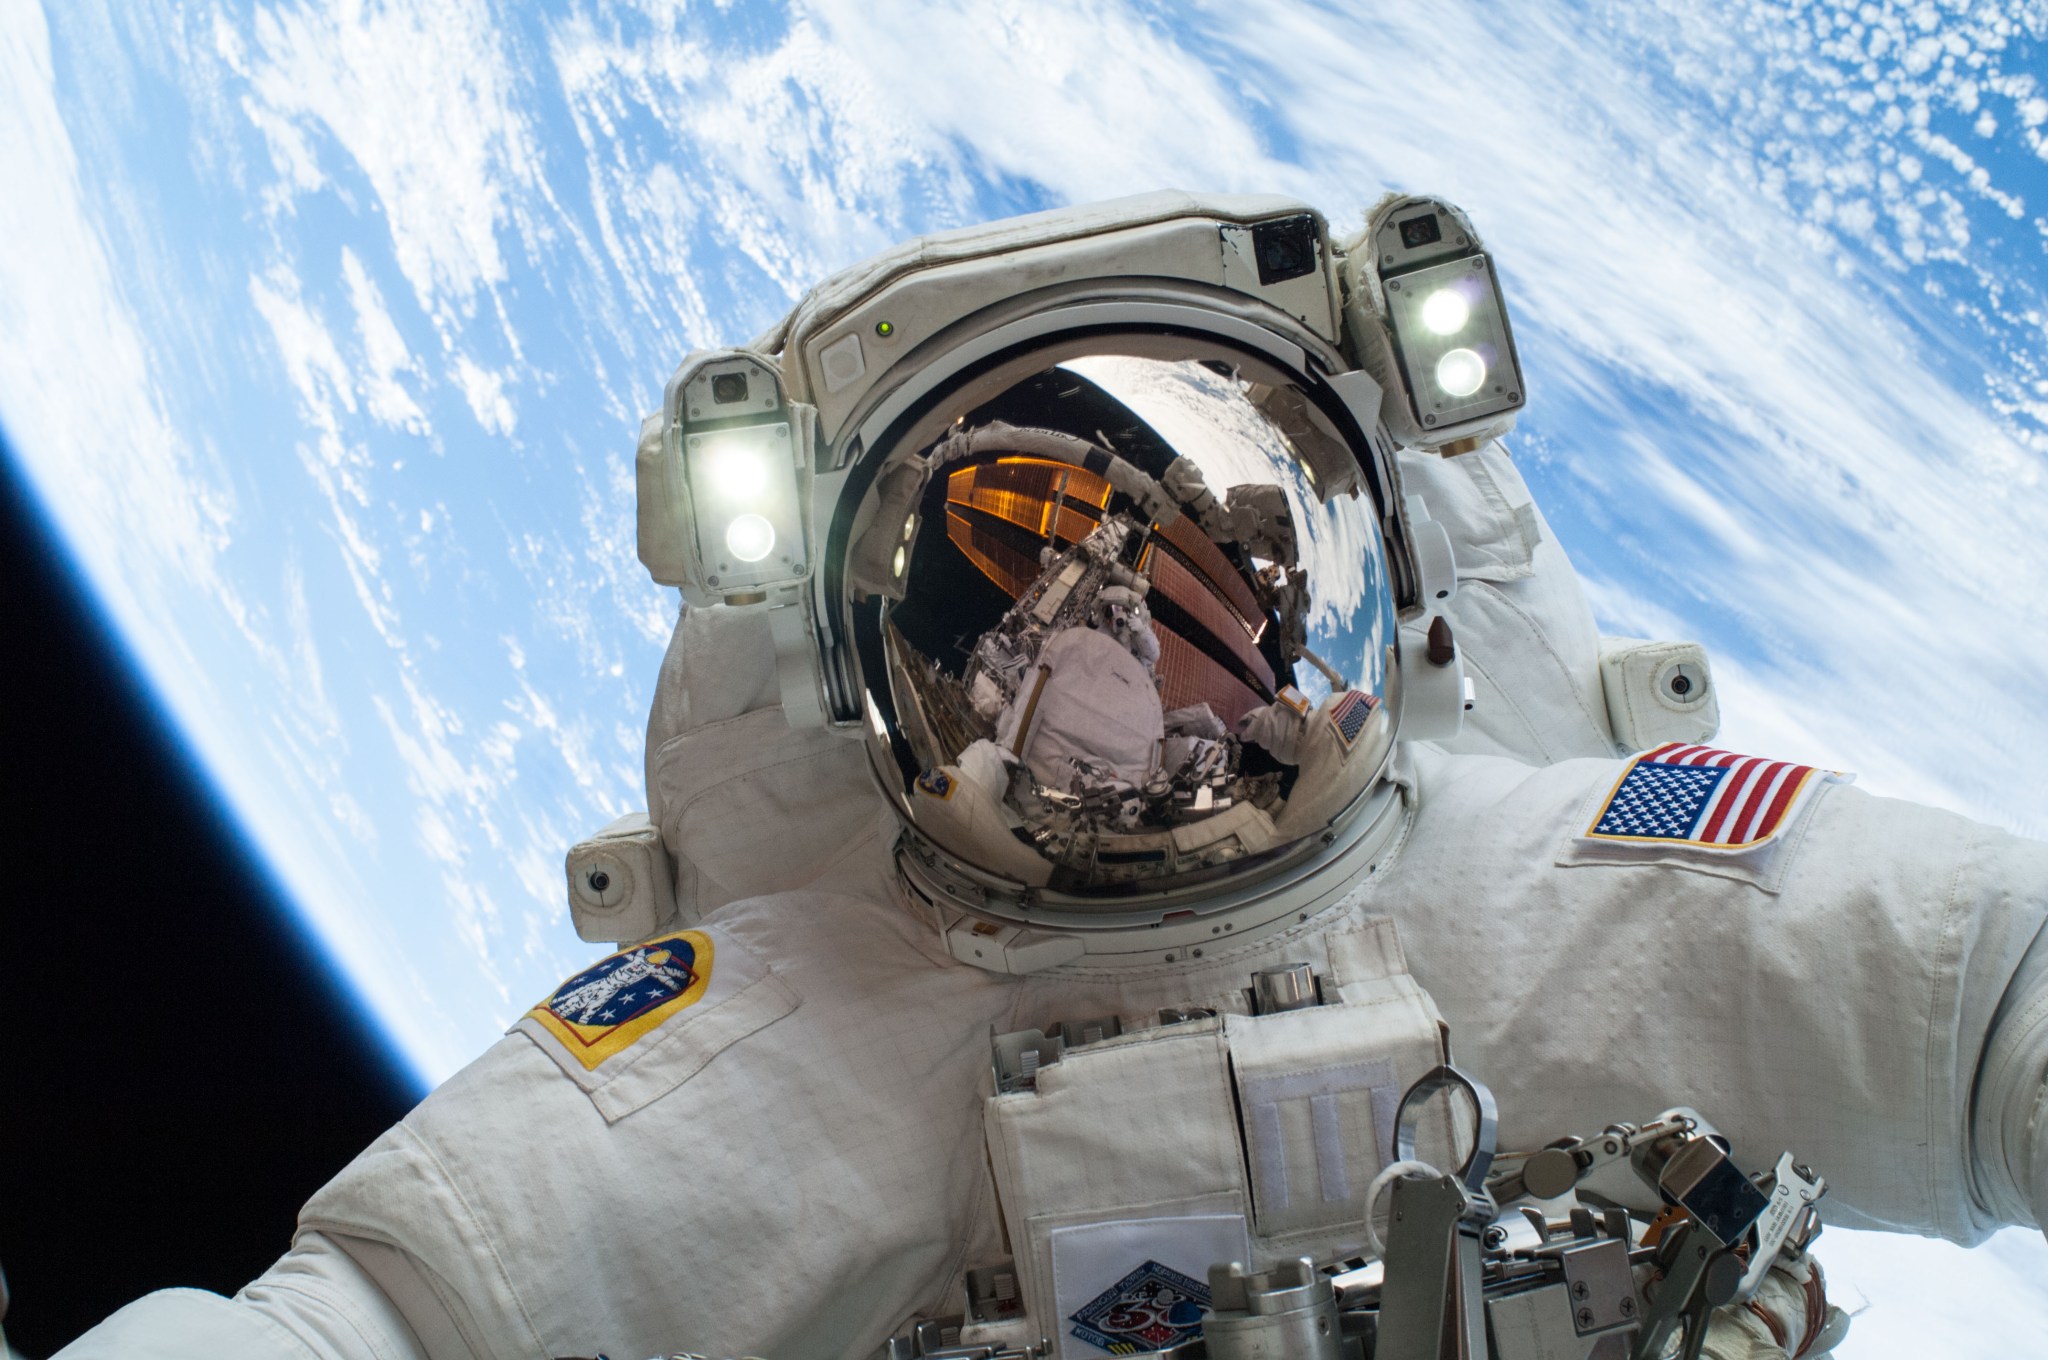 NASA astronaut Mike Hopkins on a spacewalk with International Space Station and fellow spacewalker visible in helmet visor